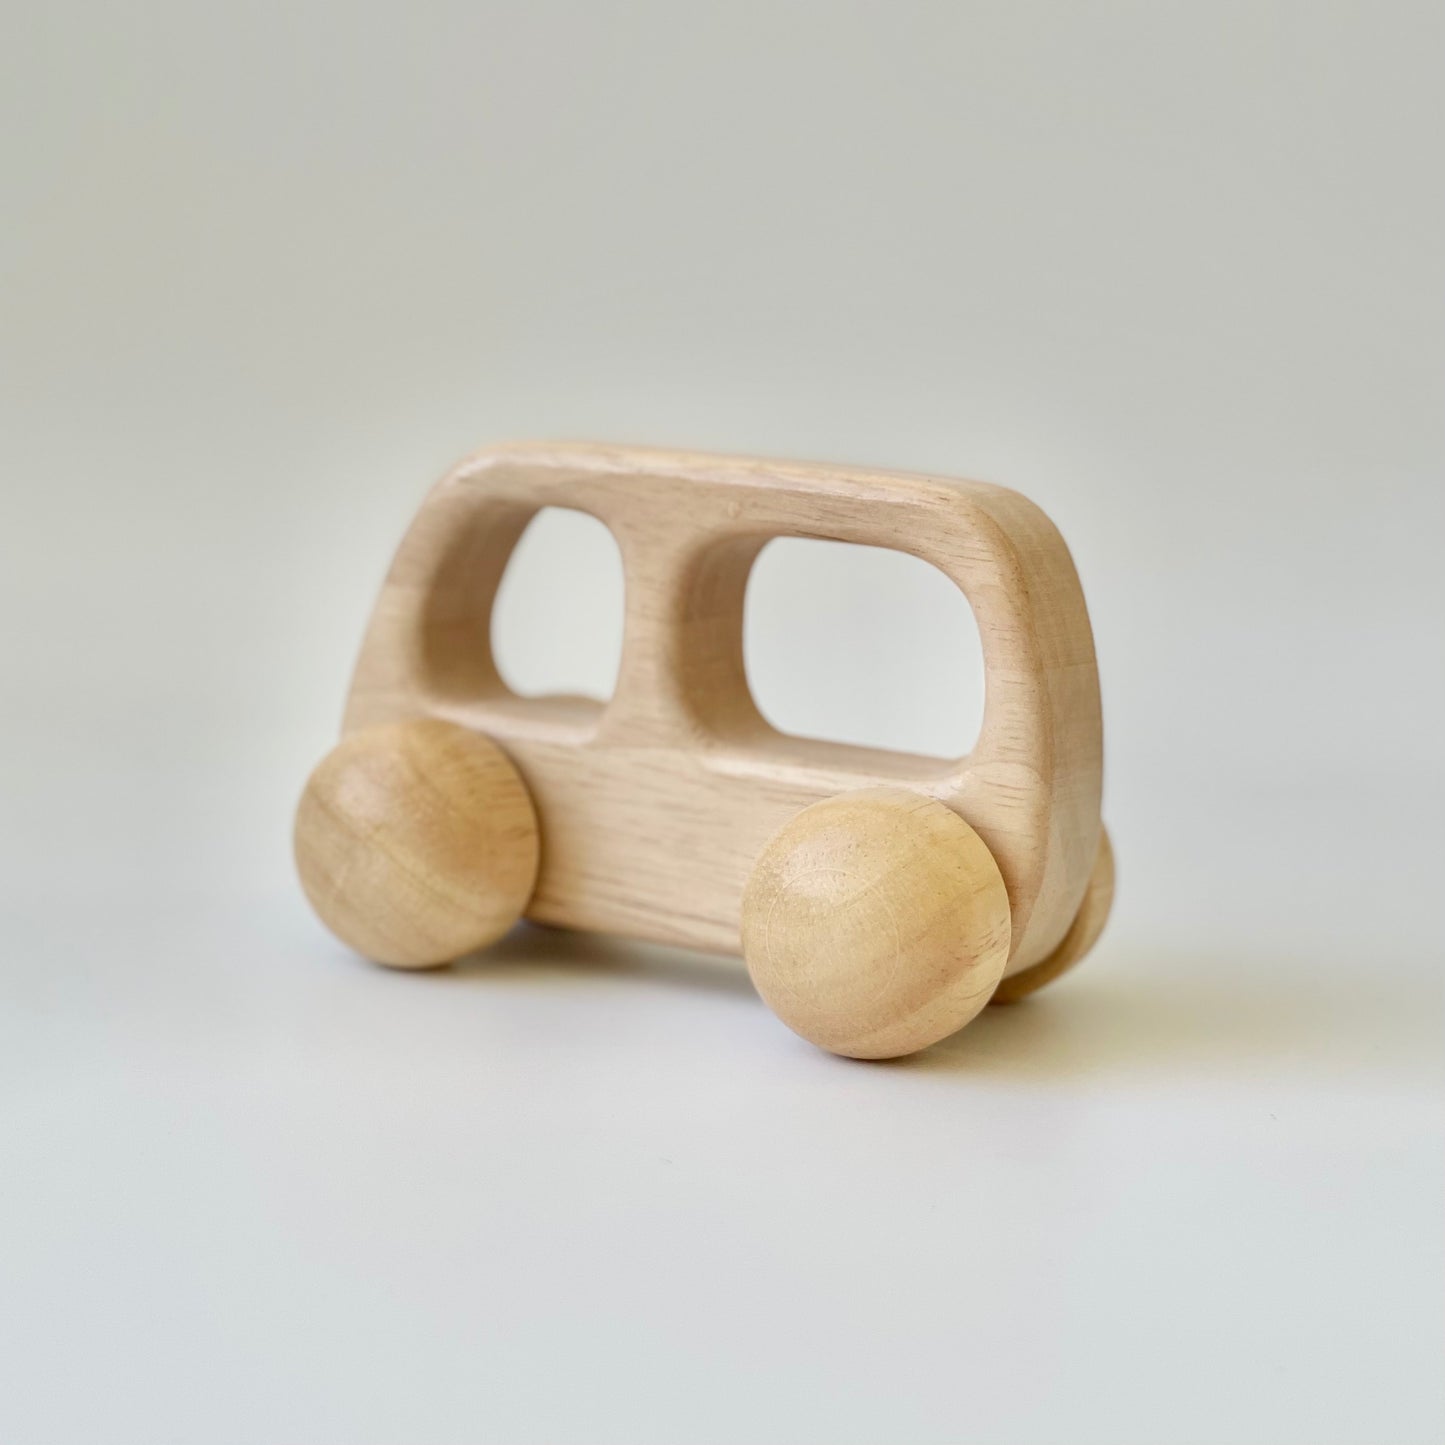 Wooden Toy Bus